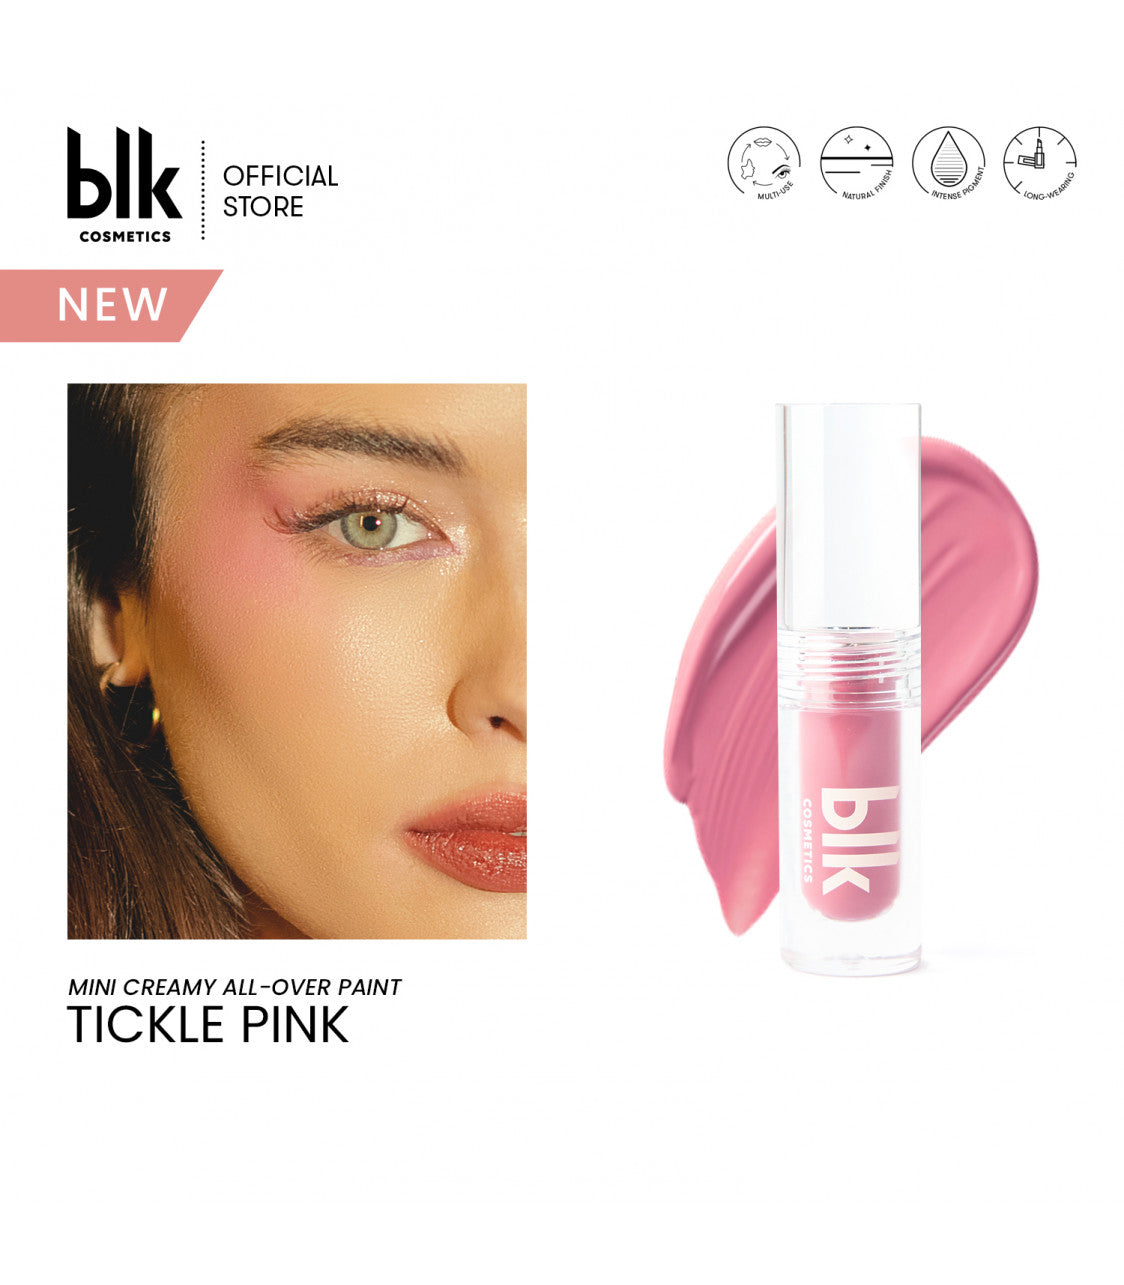 blk Cosmetics Mini Creamy All Over Paint Tickle Pink